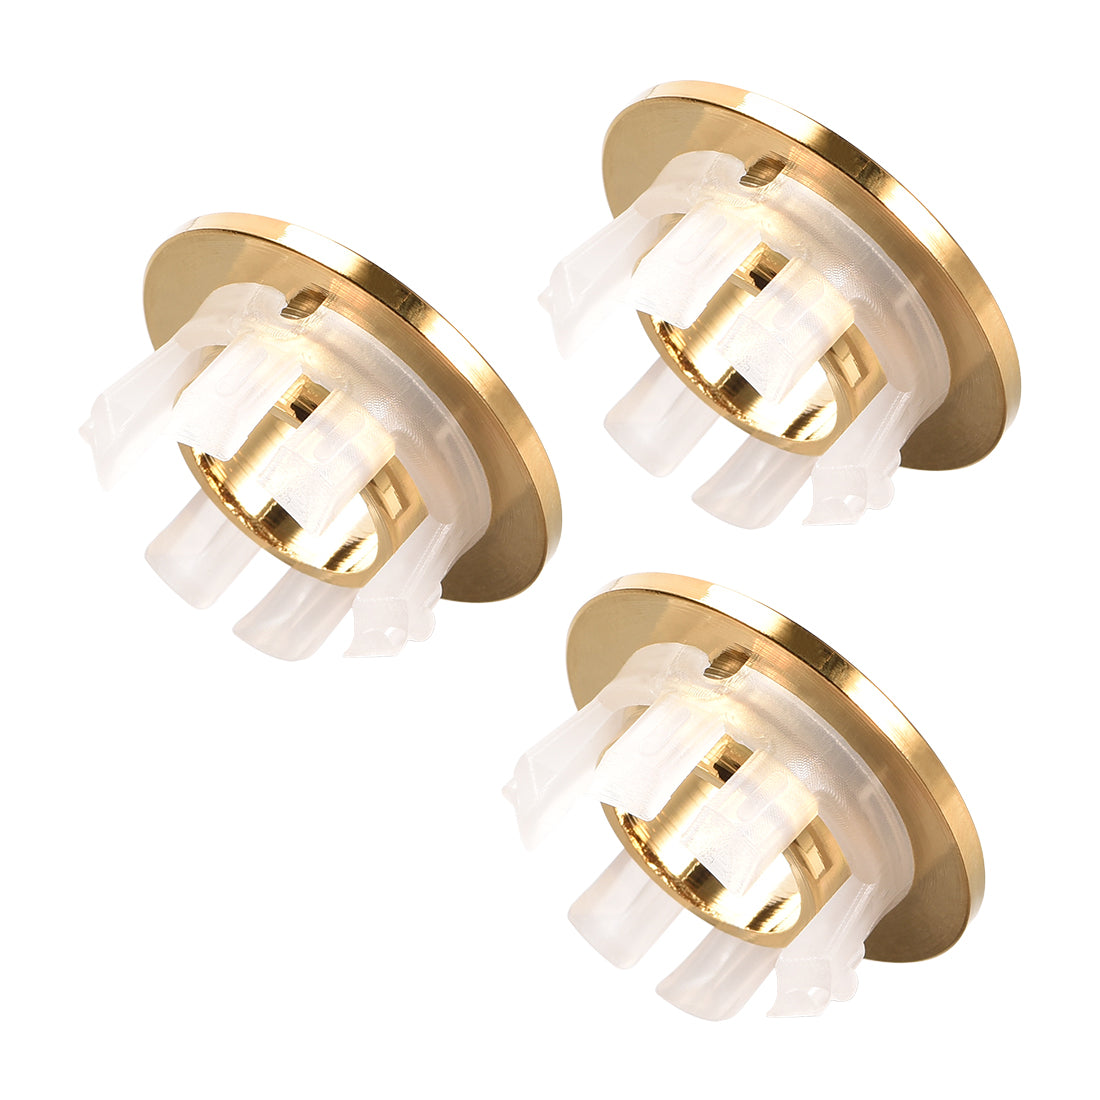 uxcell Uxcell Sink Overflow Covers Kitchen Basin Trim Round Hole Caps Insert Spares Gold Tone 3 Pcs